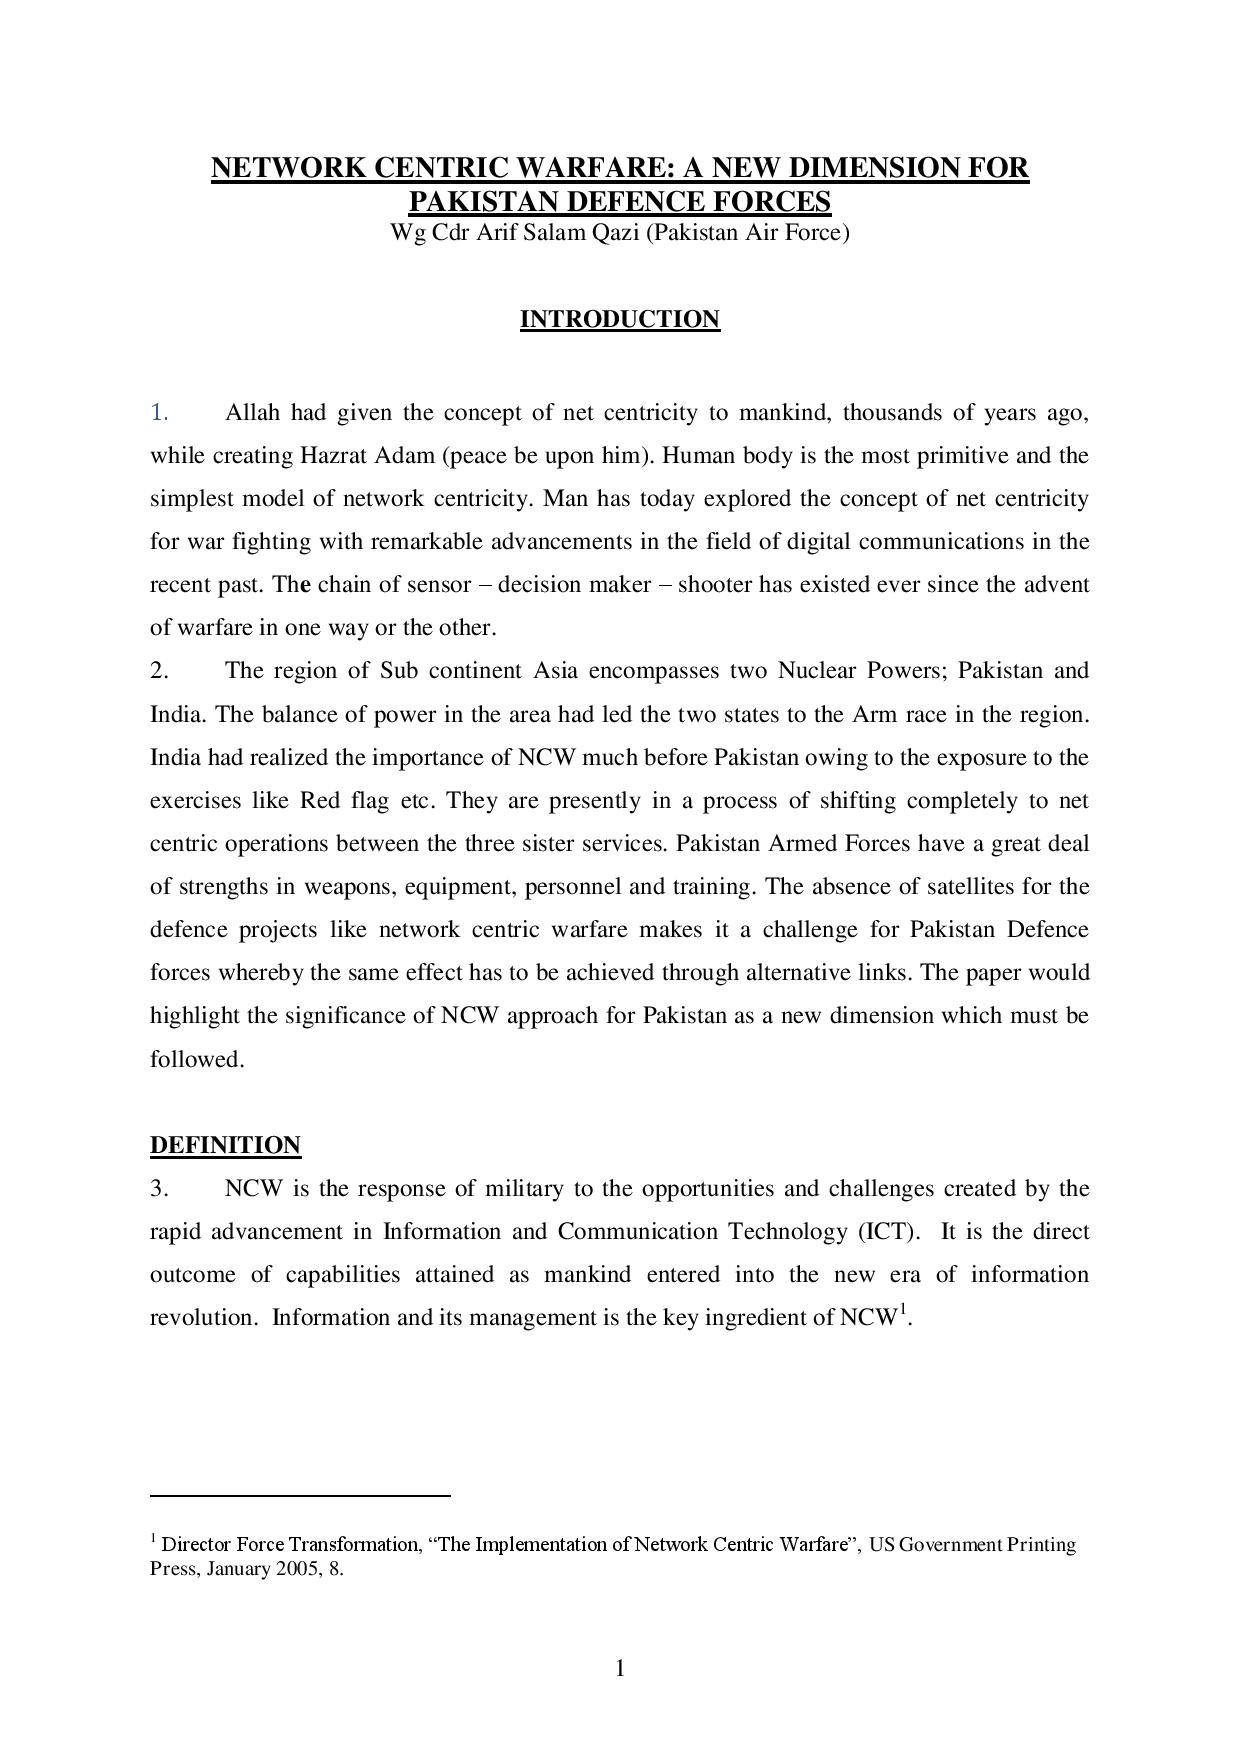 LINK_NETWORK CENTRIC WARFARE A NEW DIMENSION FOR PAKISTAN DEFENCE FORCES-page-001.jpg